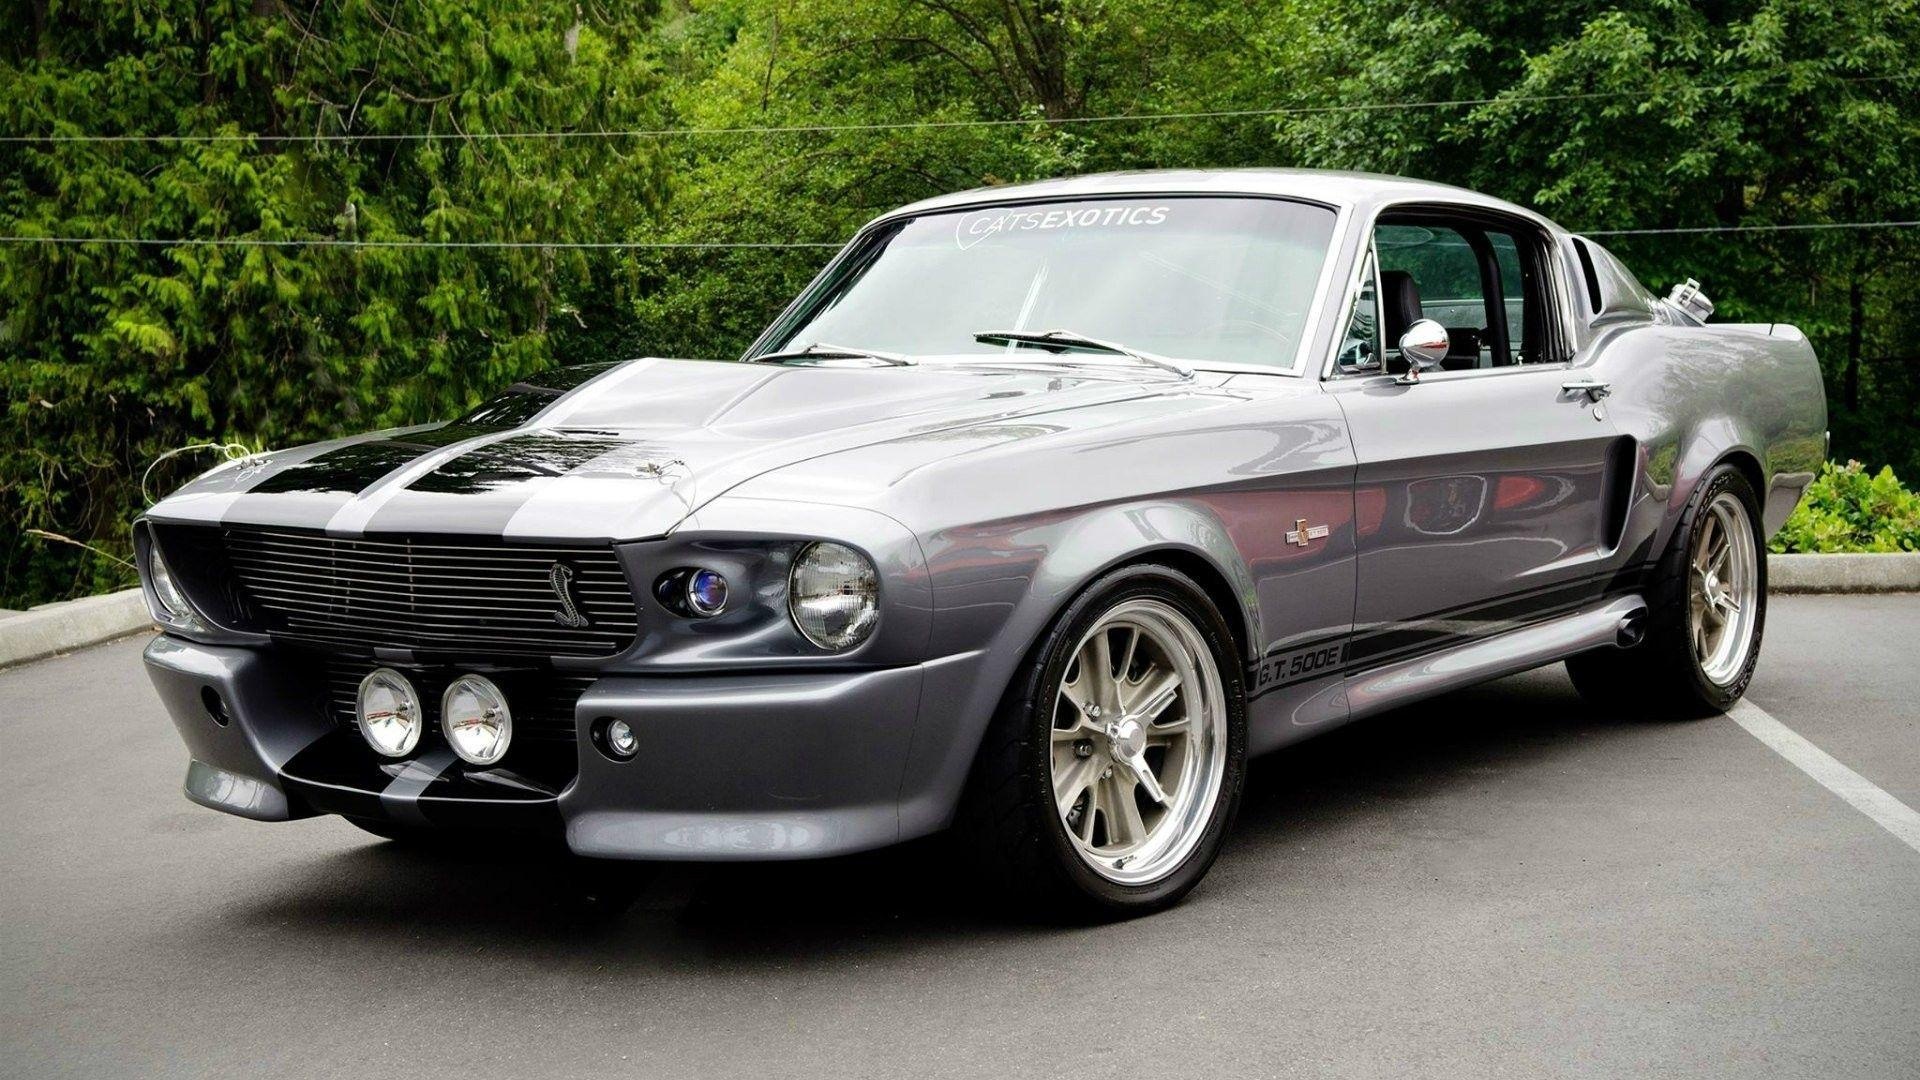 Ford Mustang Eleanor, 1967 model, Timeless attraction, Muscle car enthusiasts, 1920x1080 Full HD Desktop